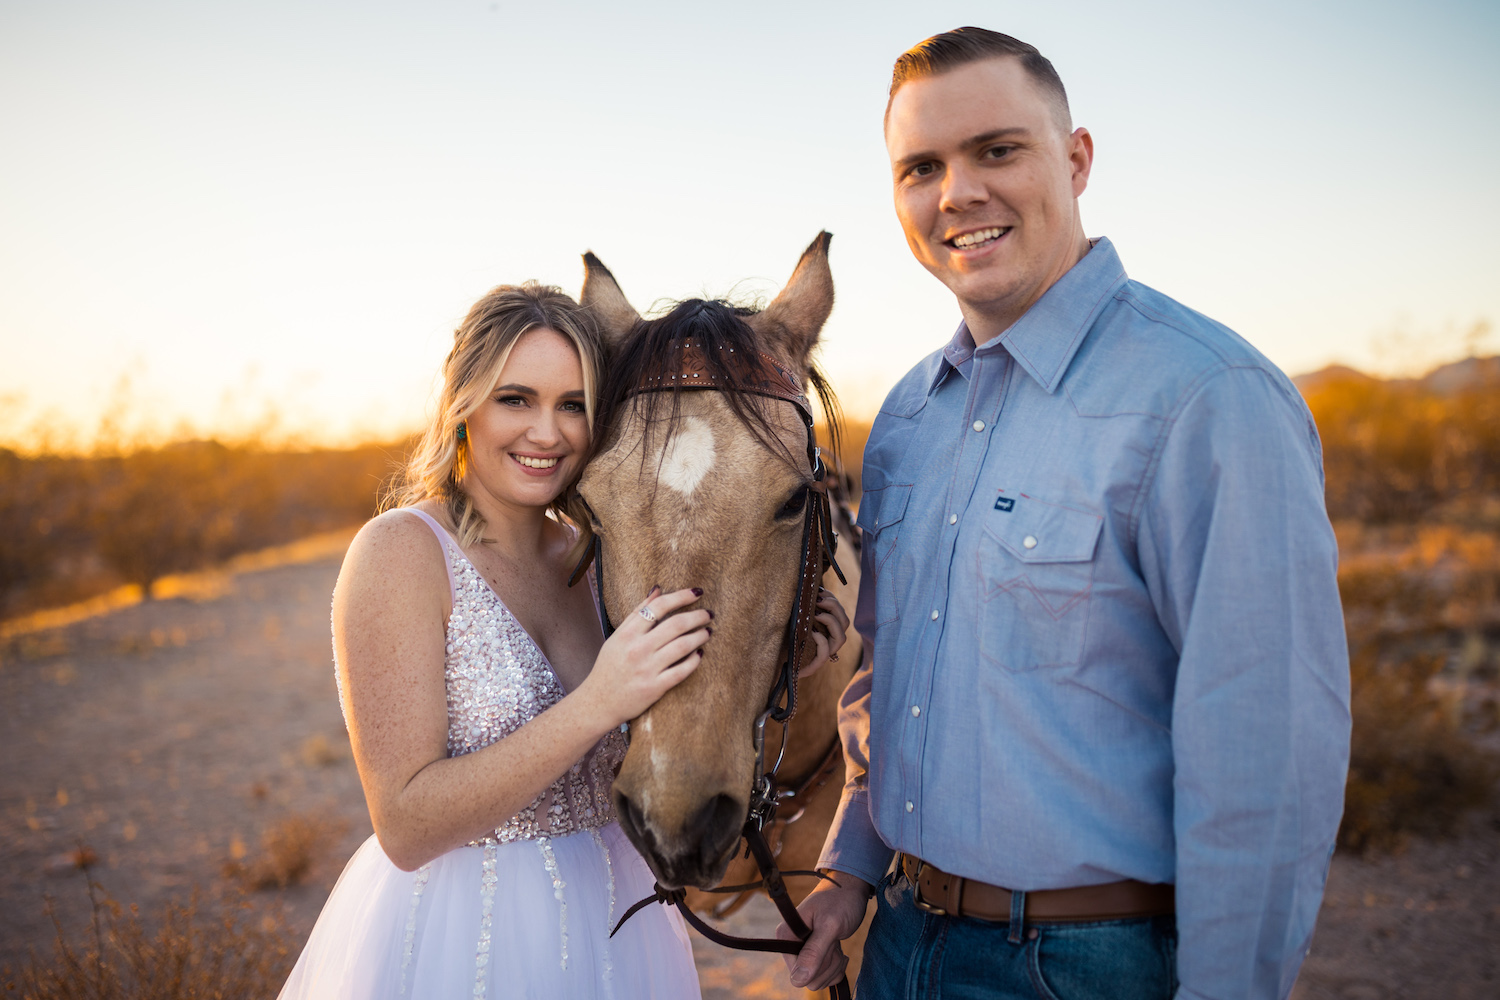 Bride and groom smile while holding a horse close during their horse wedding photographed by Makayla McGarvey.